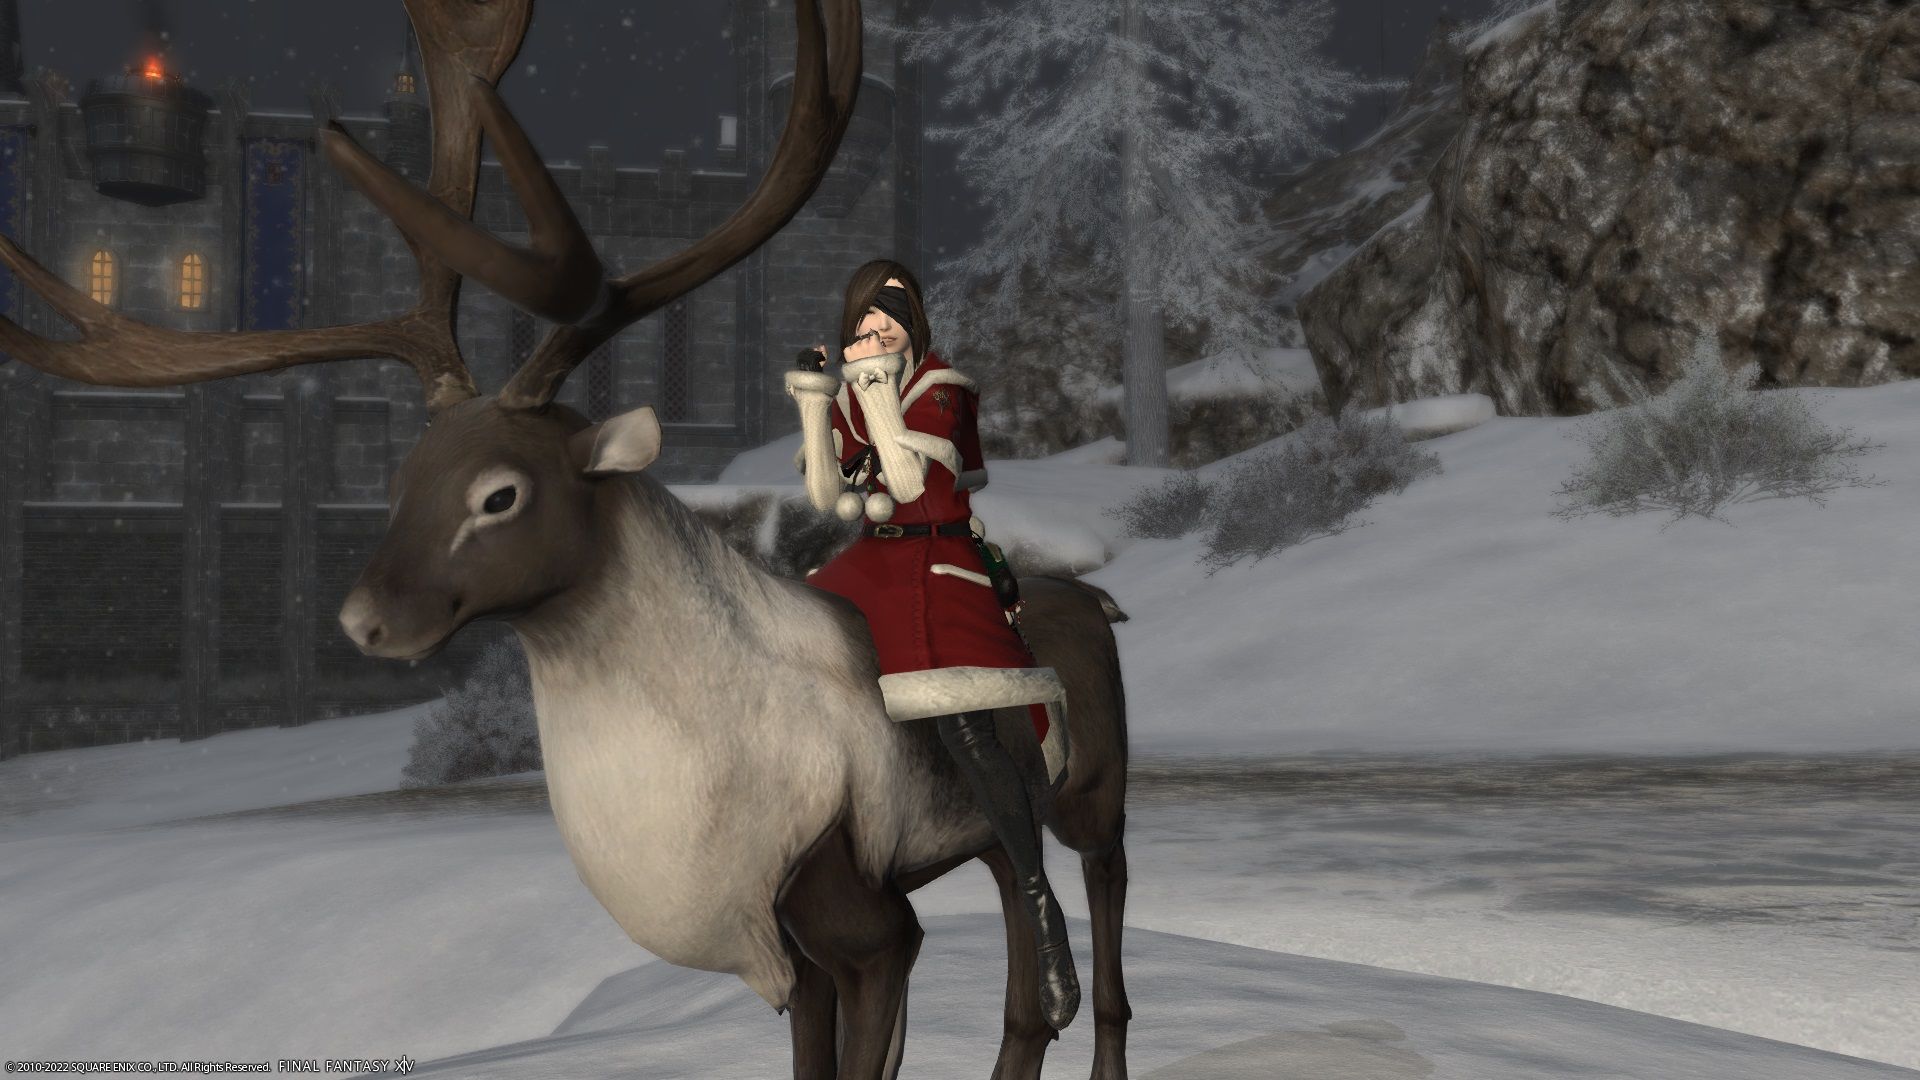 Final Fantasy 14 player on the starlight steed mount